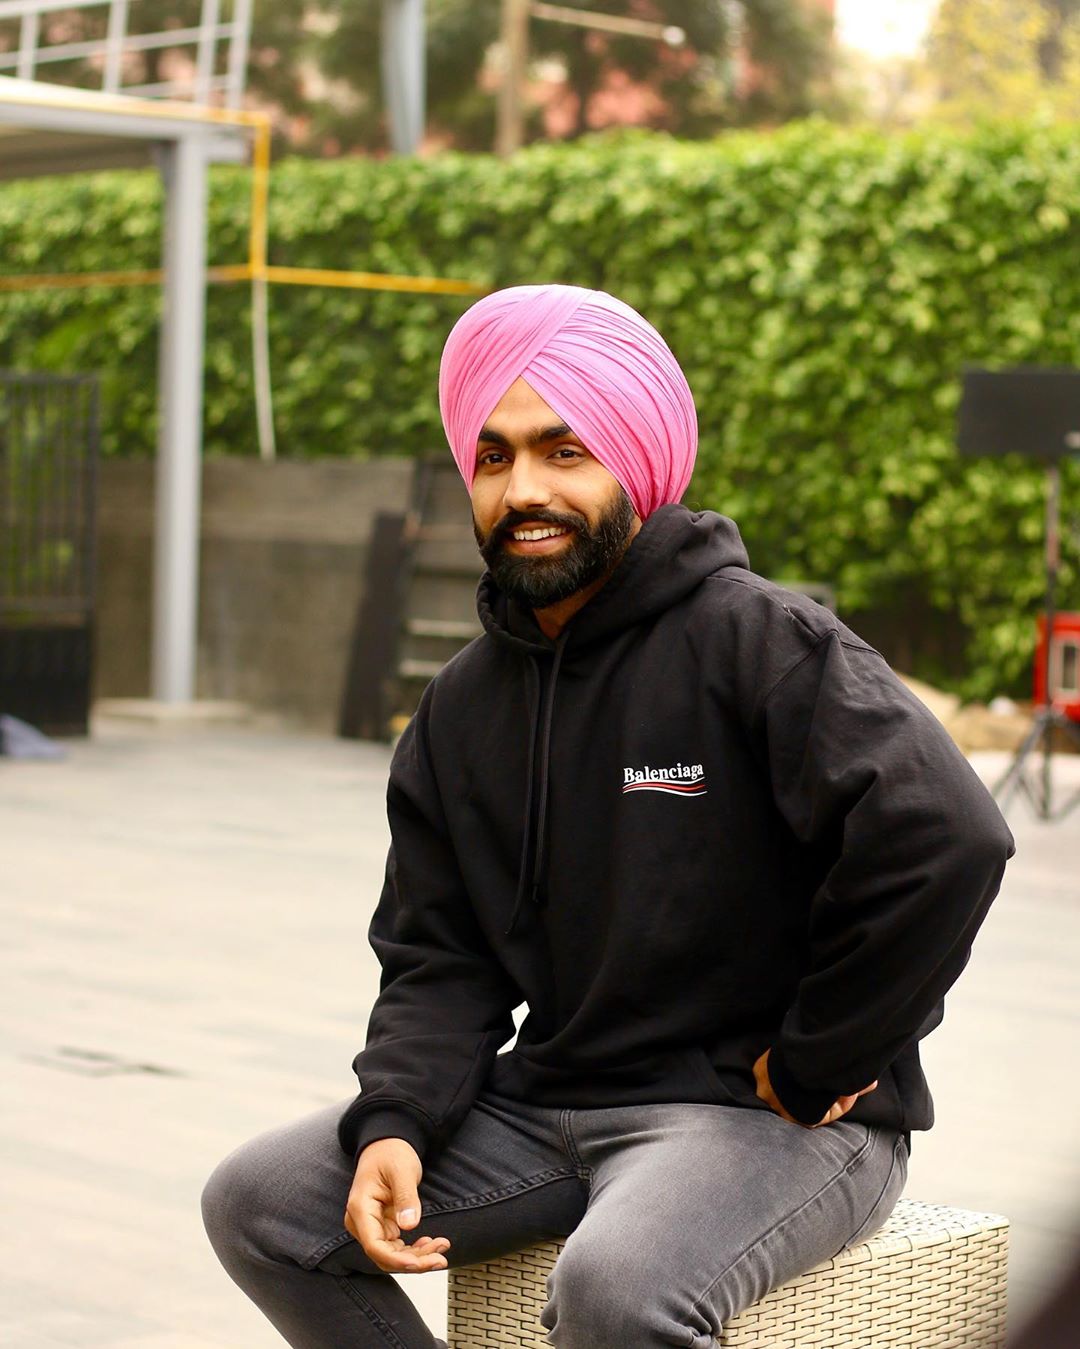 Ammy Virk picture